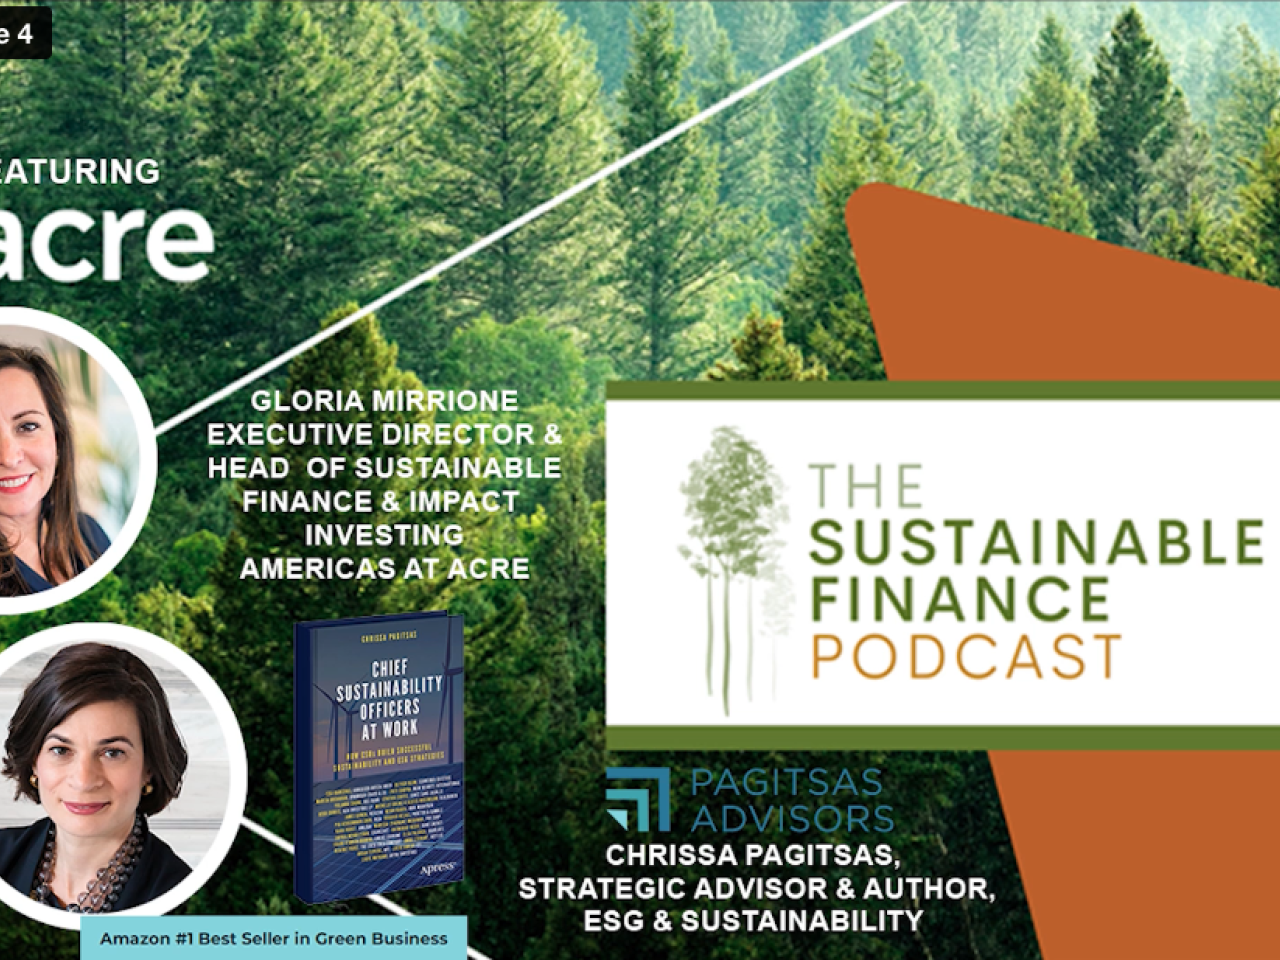 The Sustainable Finance Podcast Episode 4